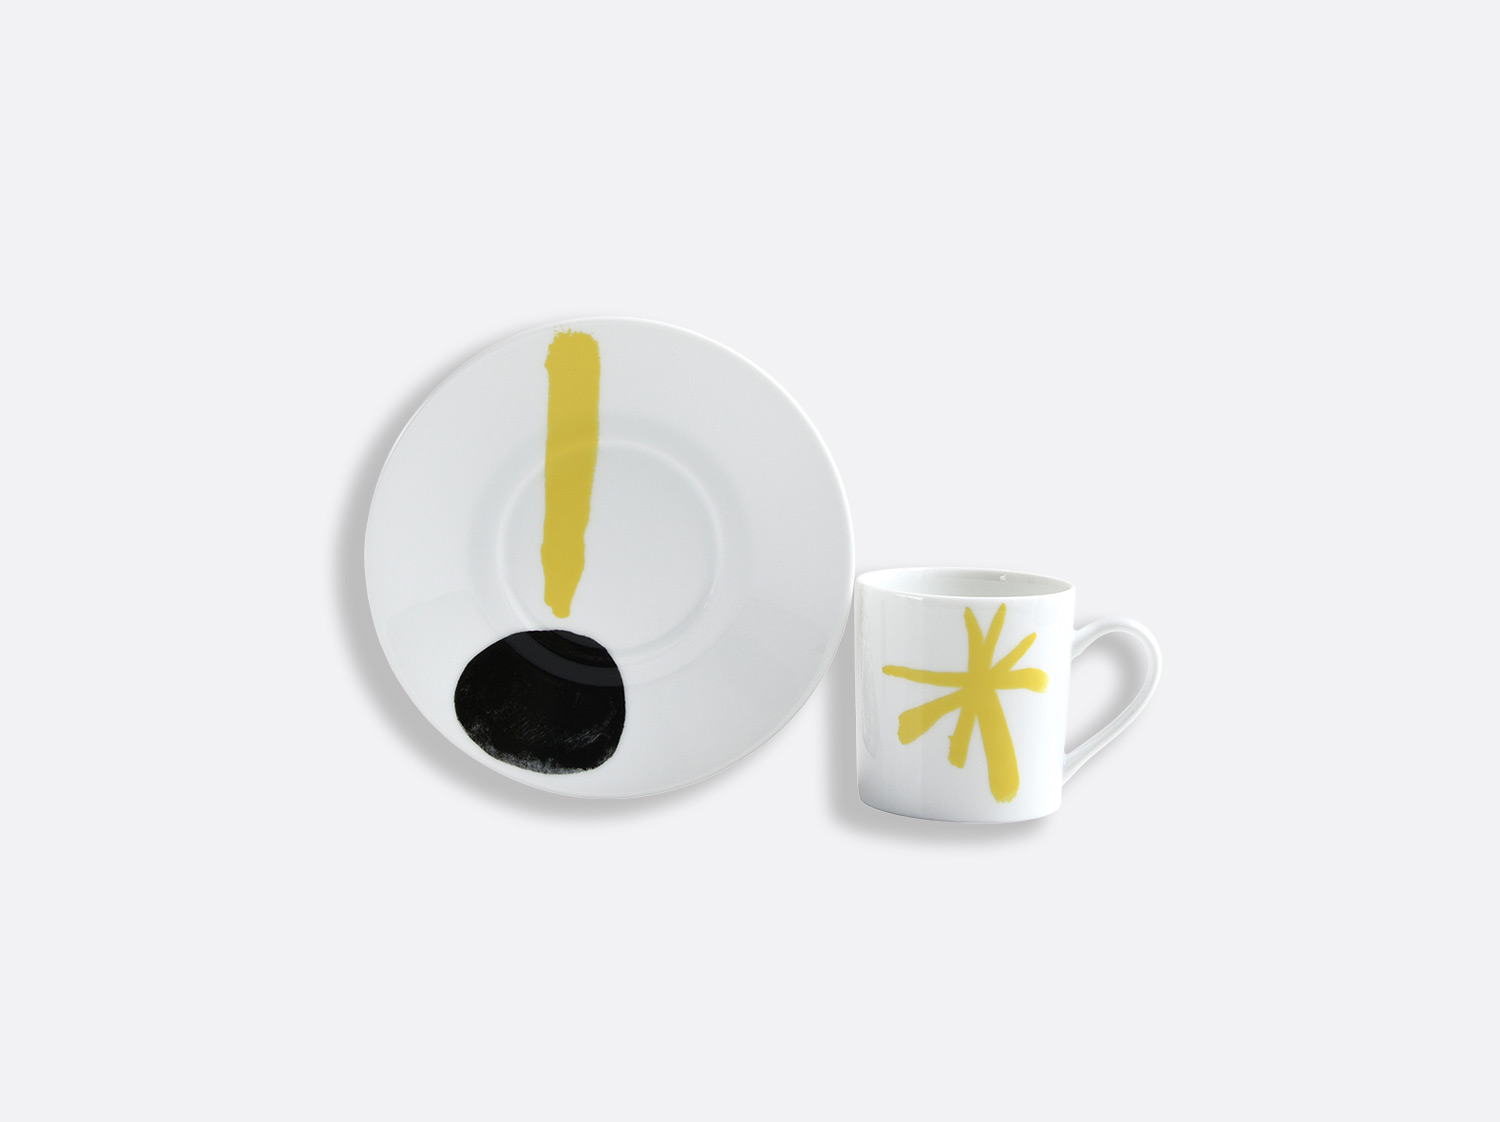 China 4 Espresso cups and saucers Yellow - Pages 15 & 61 of the collection PARLER SEUL - Joan Miro | Bernardaud